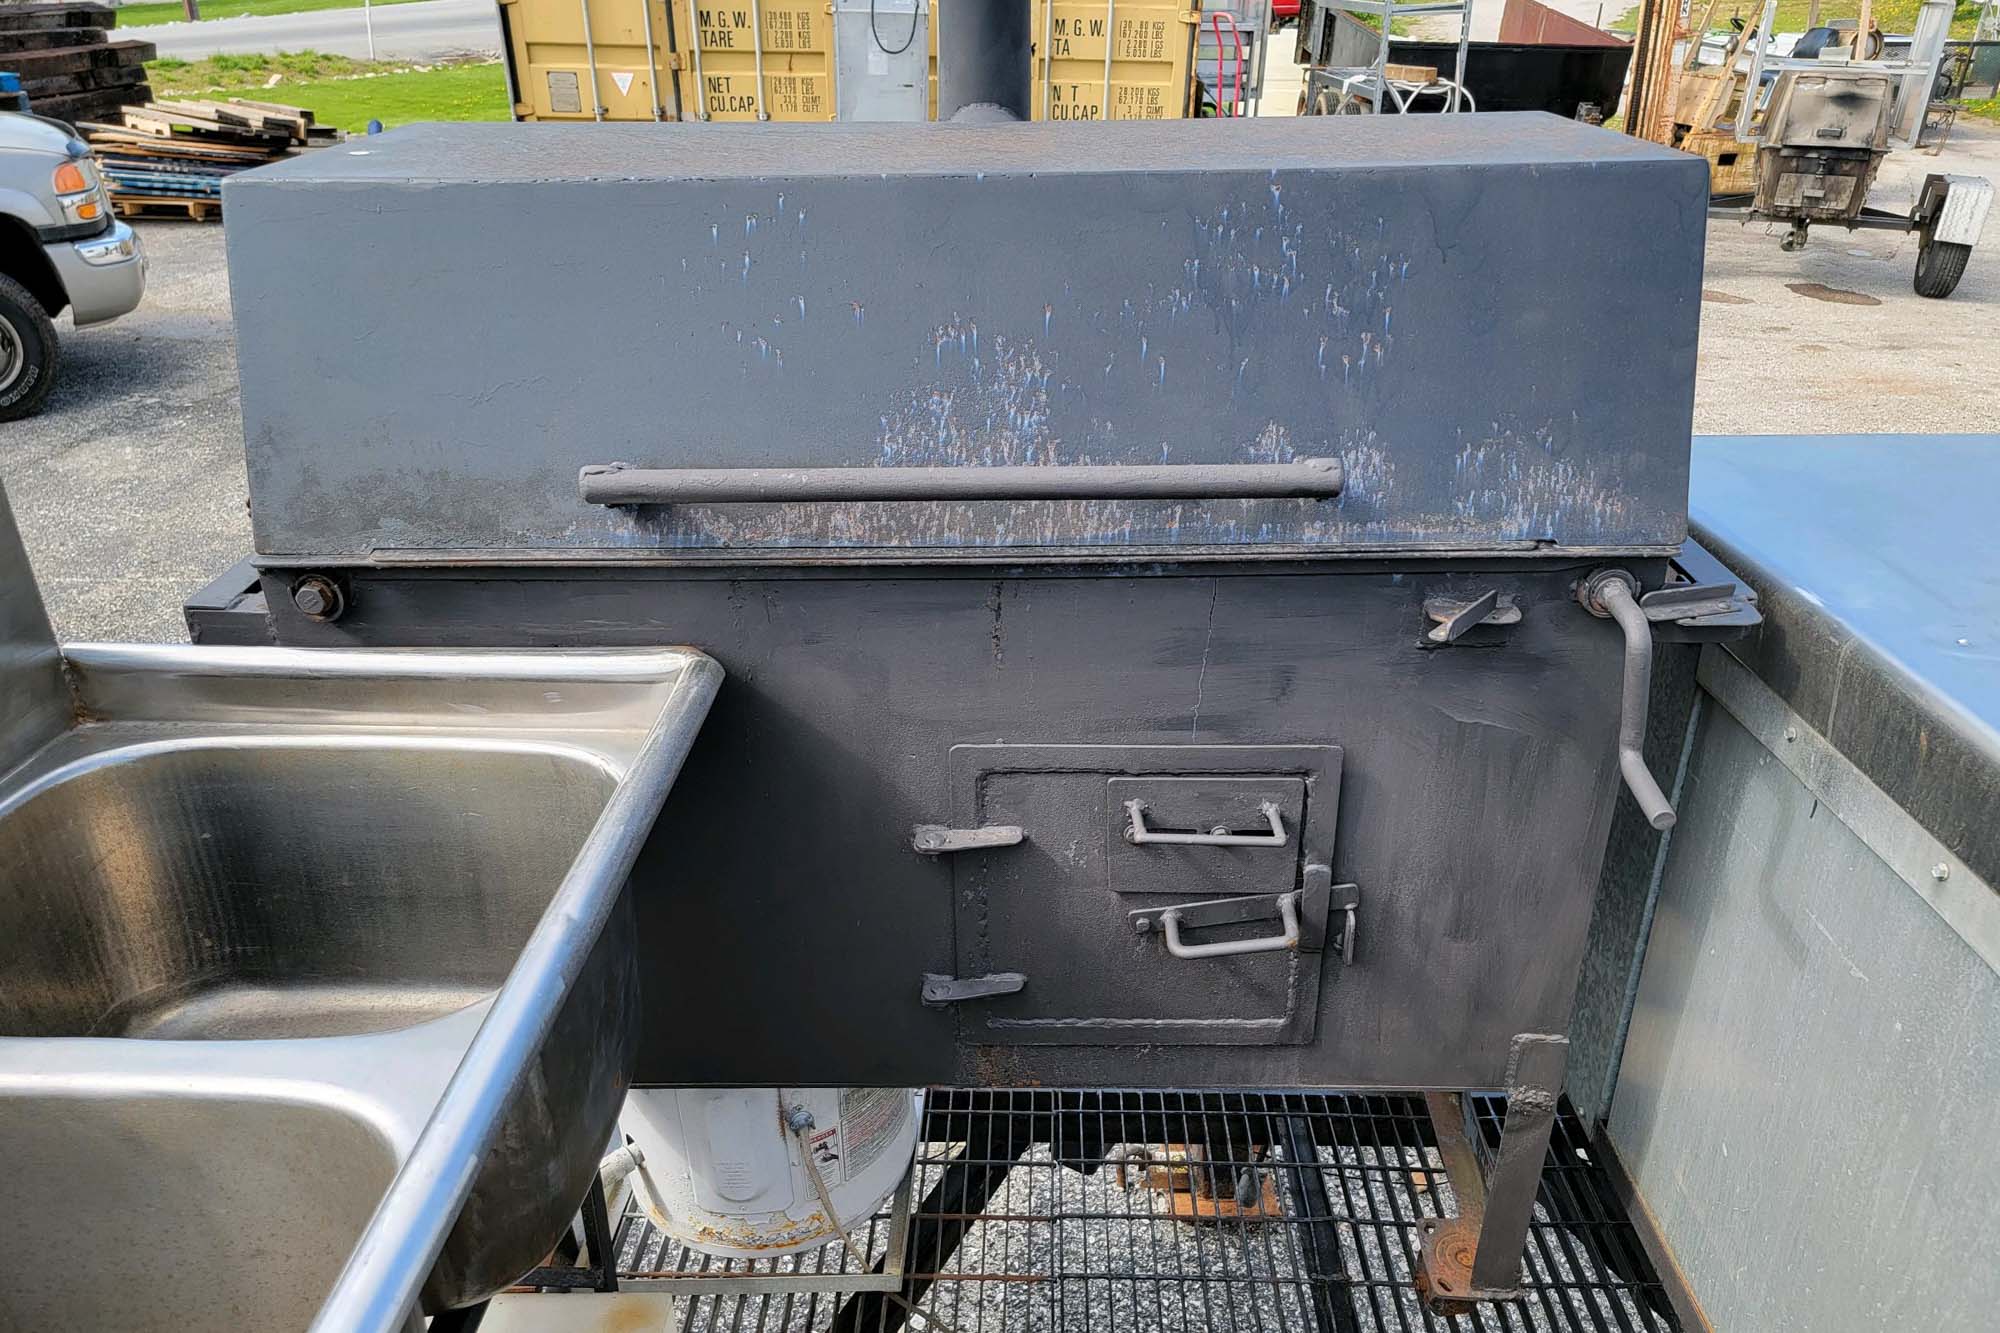 20' Double-Axle Trailer With 6' x 3' Smoker, a 2' x 3' Smoker, Stainless Steel Table, and 3-Bowl Sink